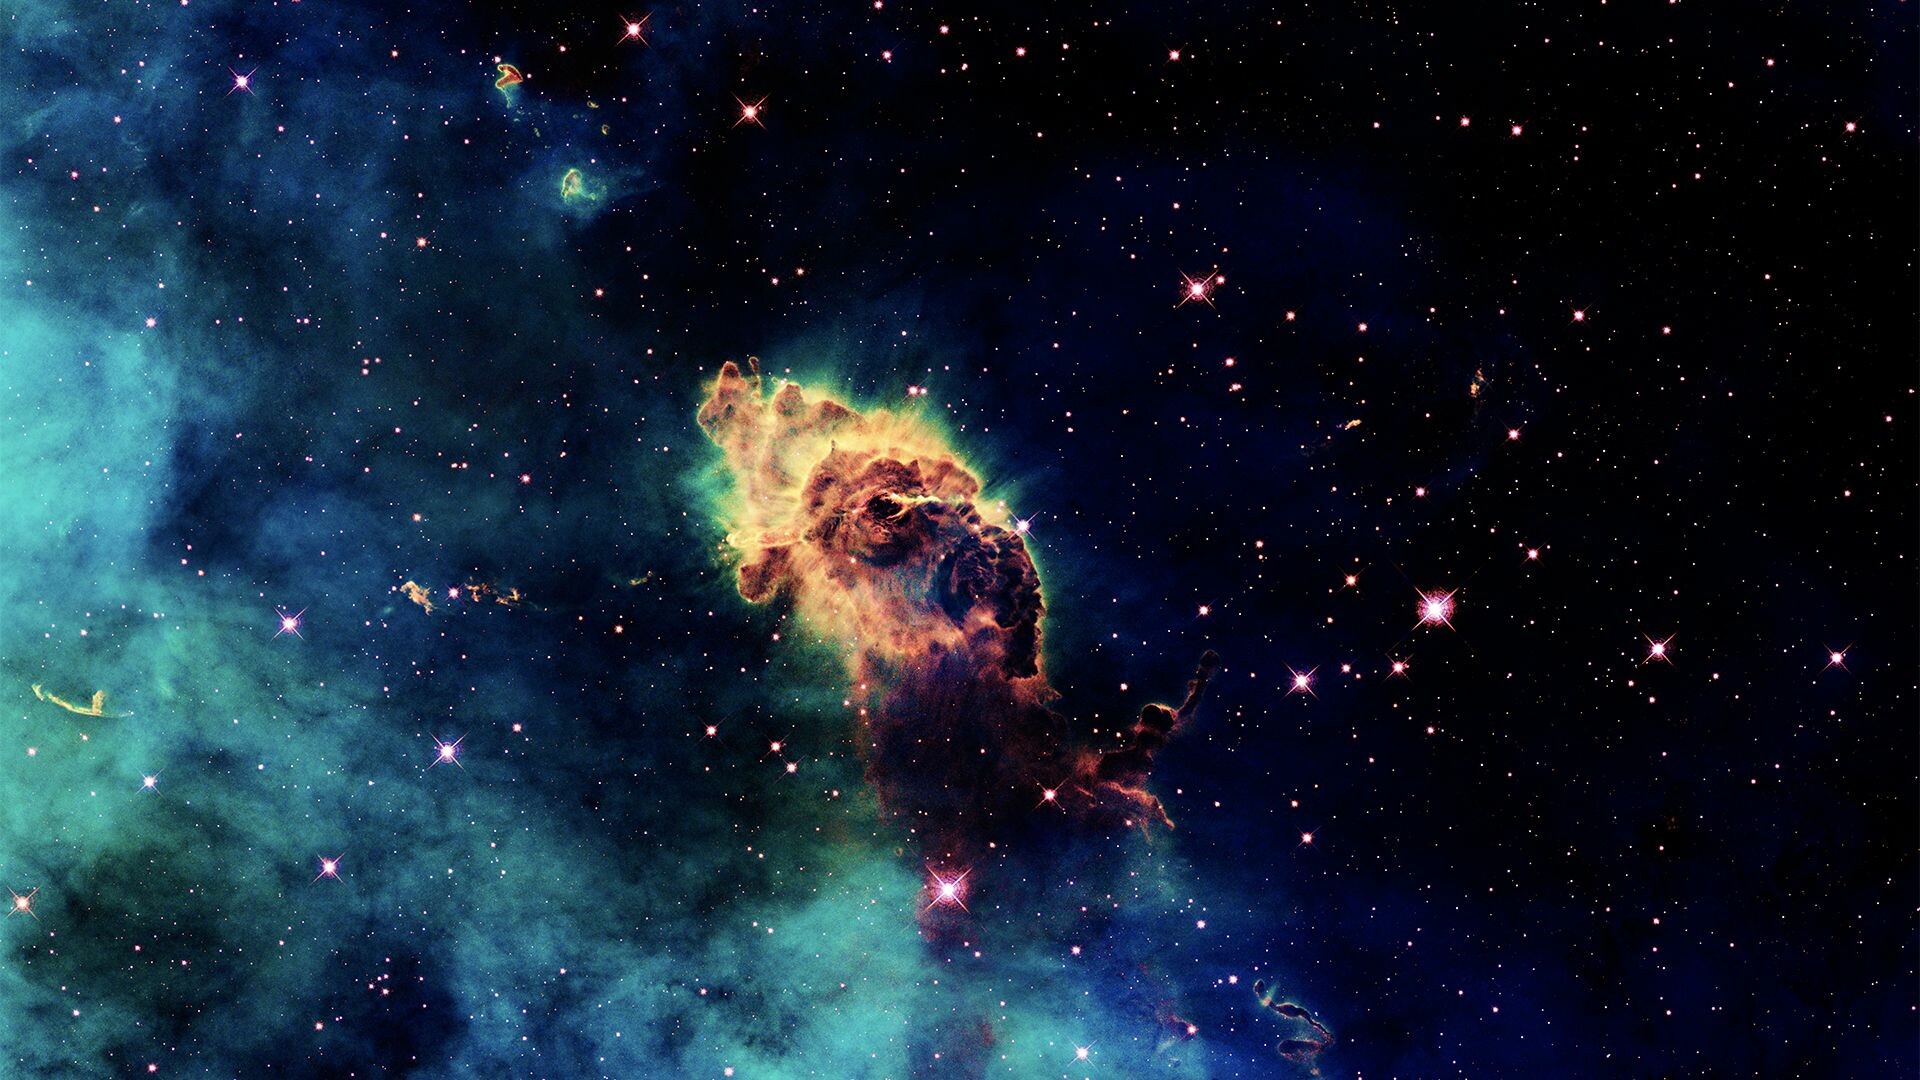 Amazing Colorful Space Orcus-2016 High Quality HD Wallpaper Preview |  10wallpaper.com